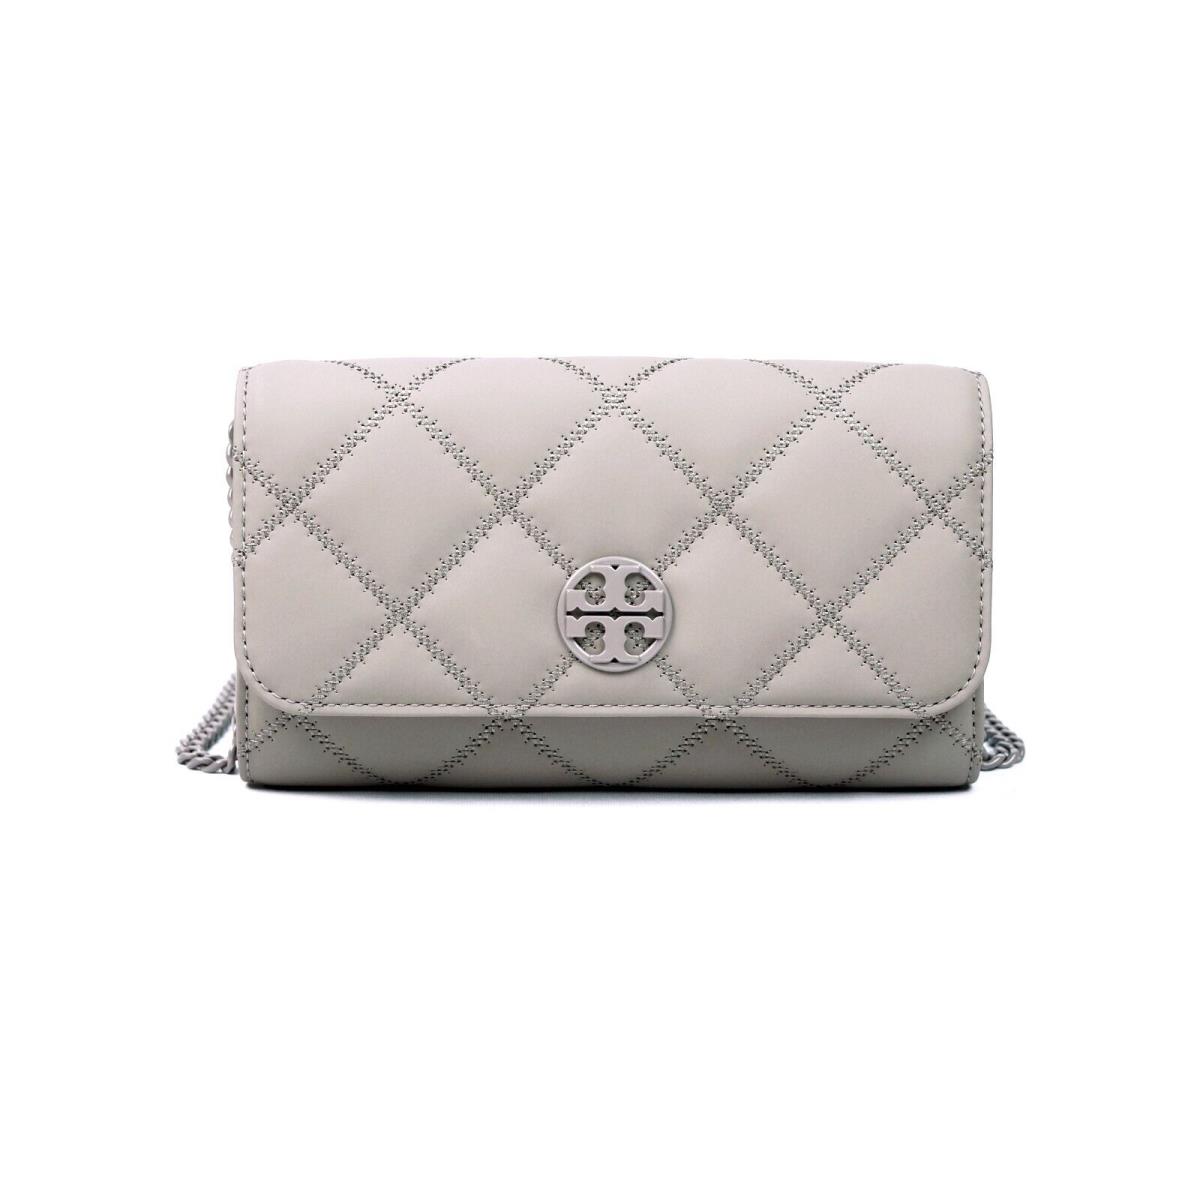 Tory Burch Willa Matte Gray Quilted PU Chain Wallet Crossbody Clutch Bag 150059